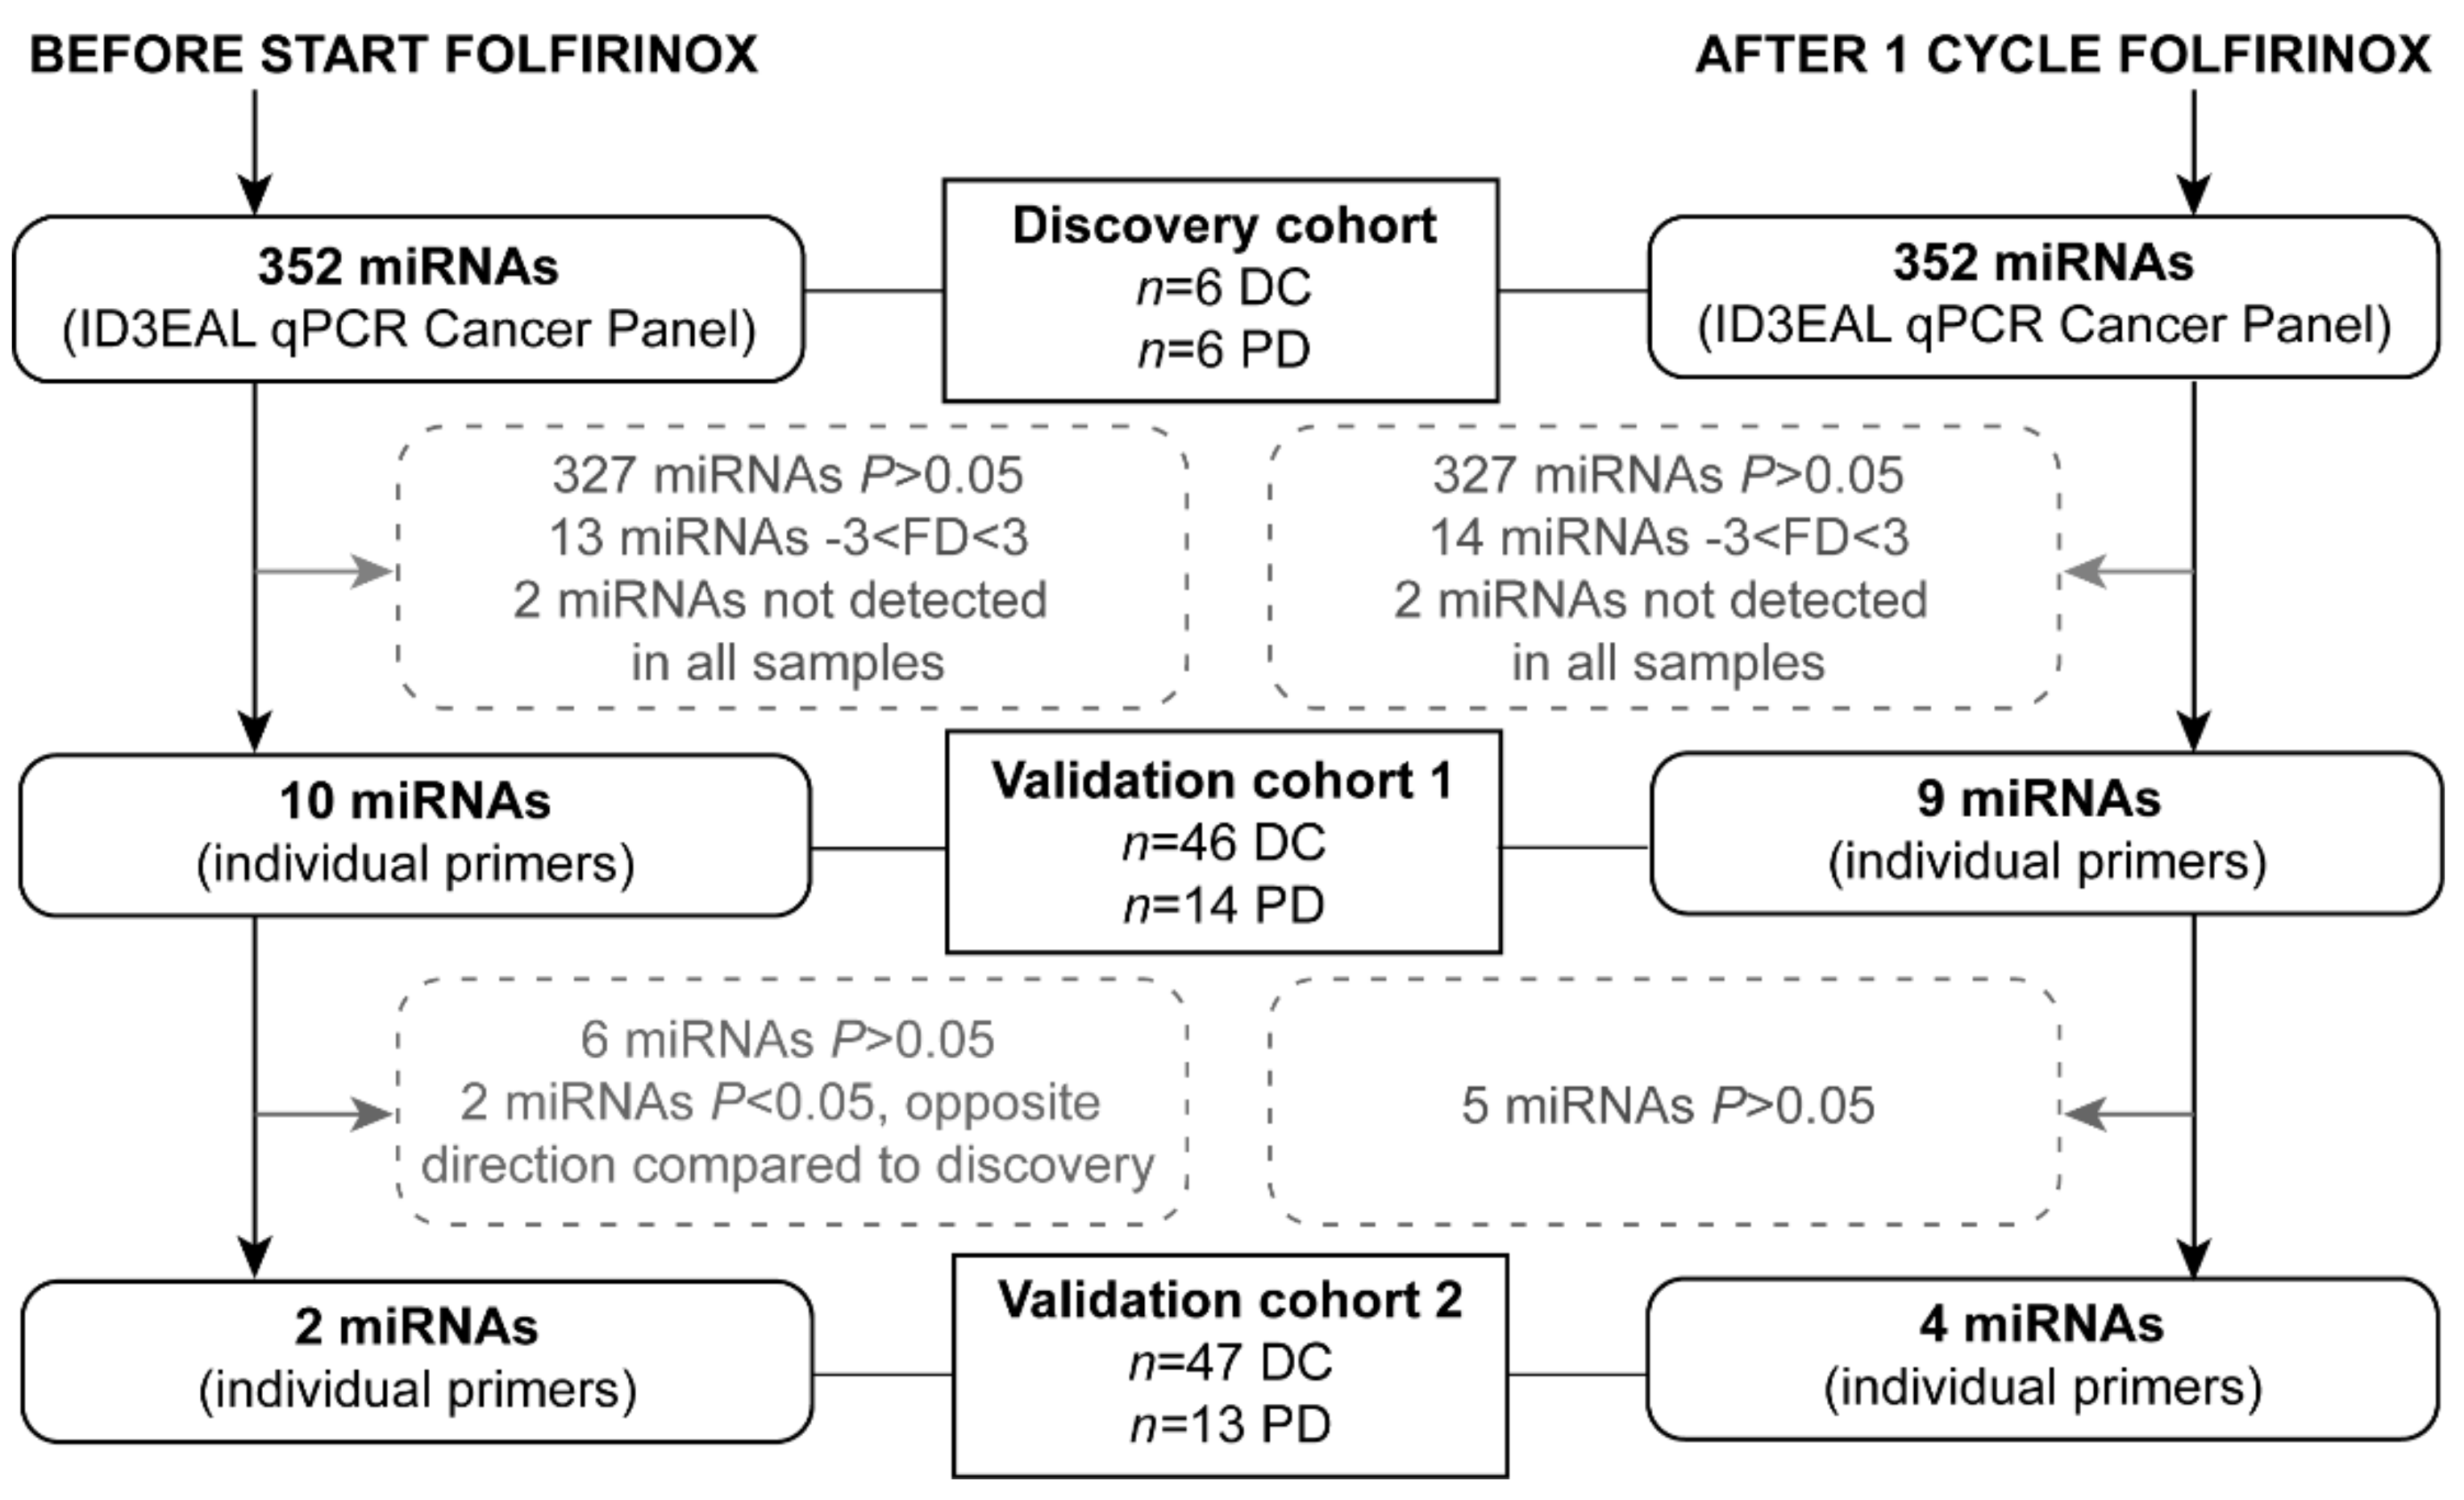 IJMS | Free Full-Text | miR-373-3p and miR-194-5p Are Associated with Early Tumor Progression during FOLFIRINOX Treatment in Pancreatic Cancer Patients: A Prospective Multicenter Study | HTML